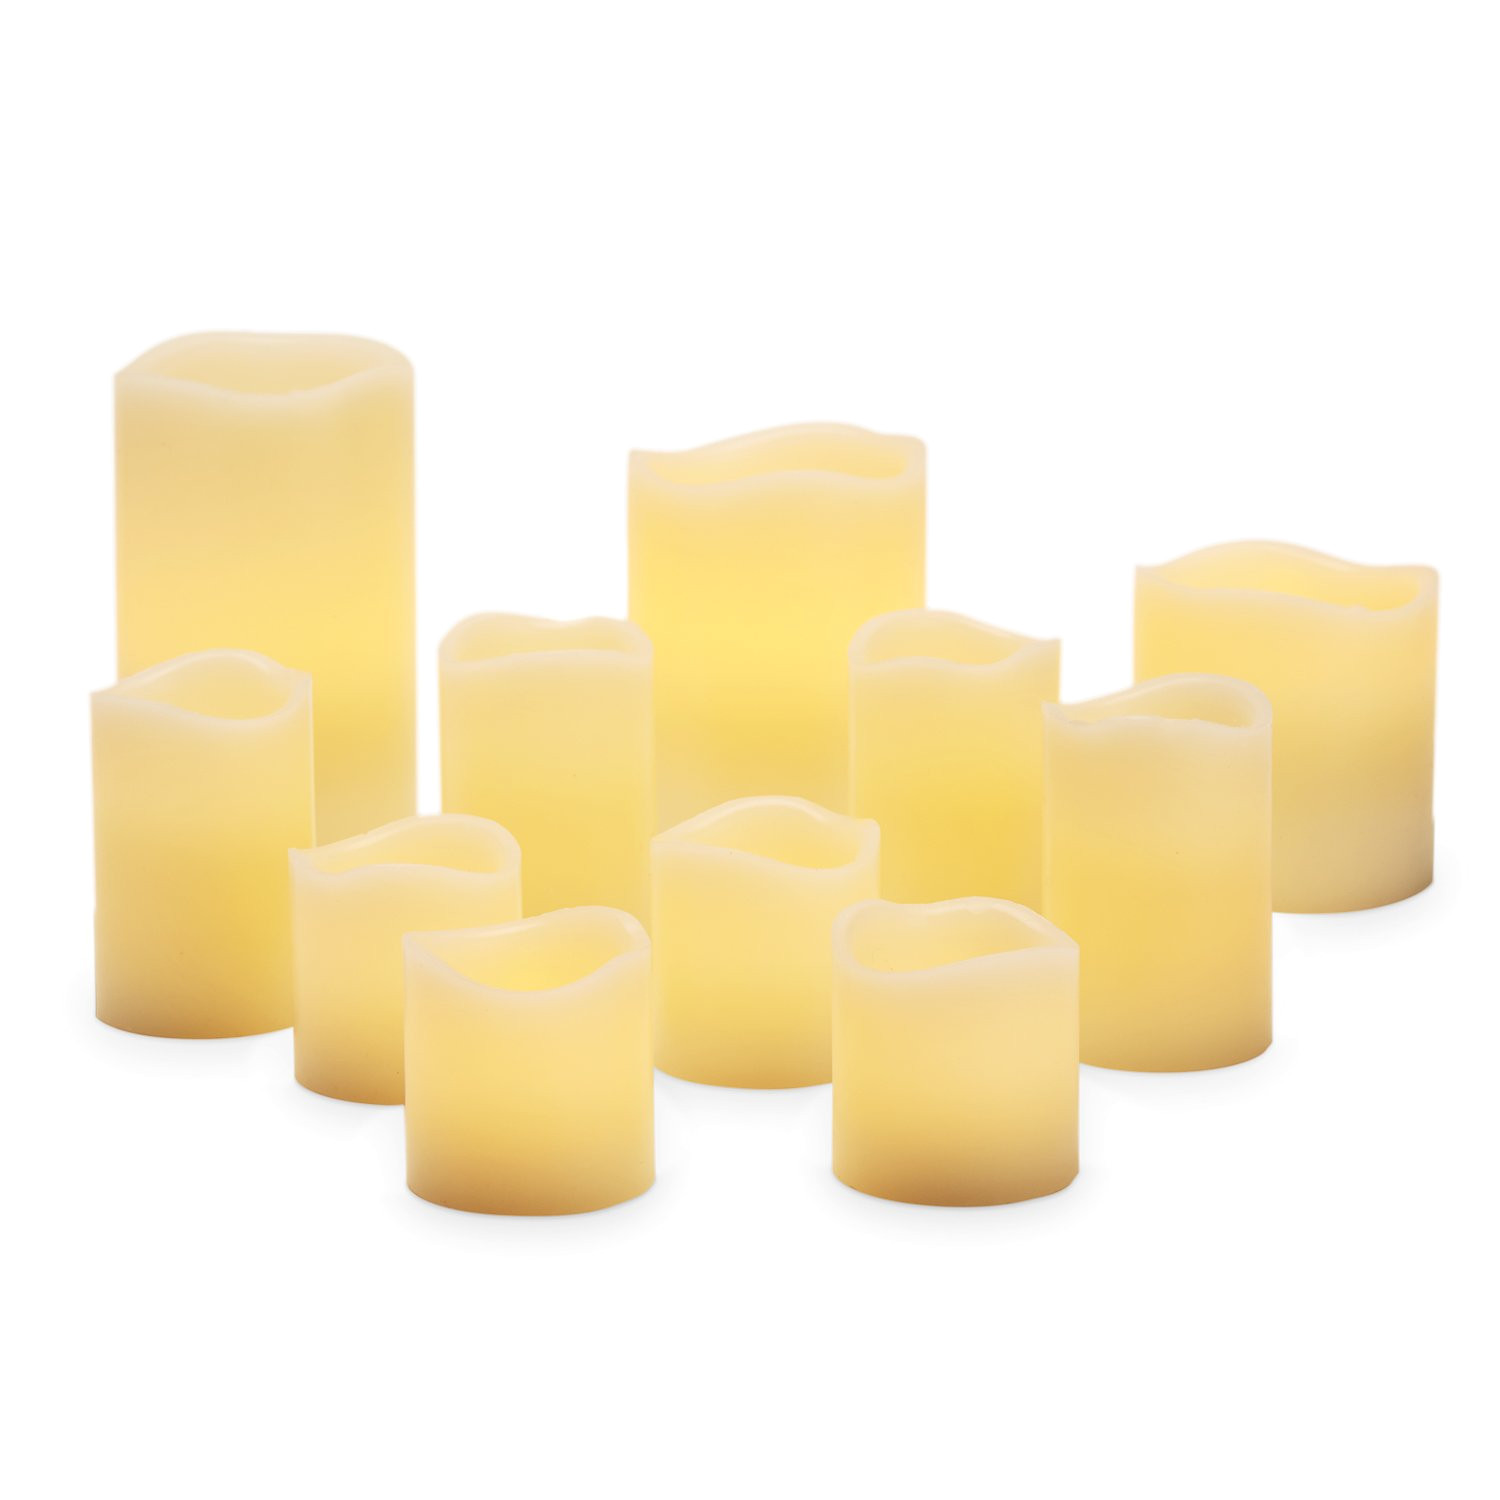 flameless pillar and votive candle set real wax flickering led candles assorted sizes